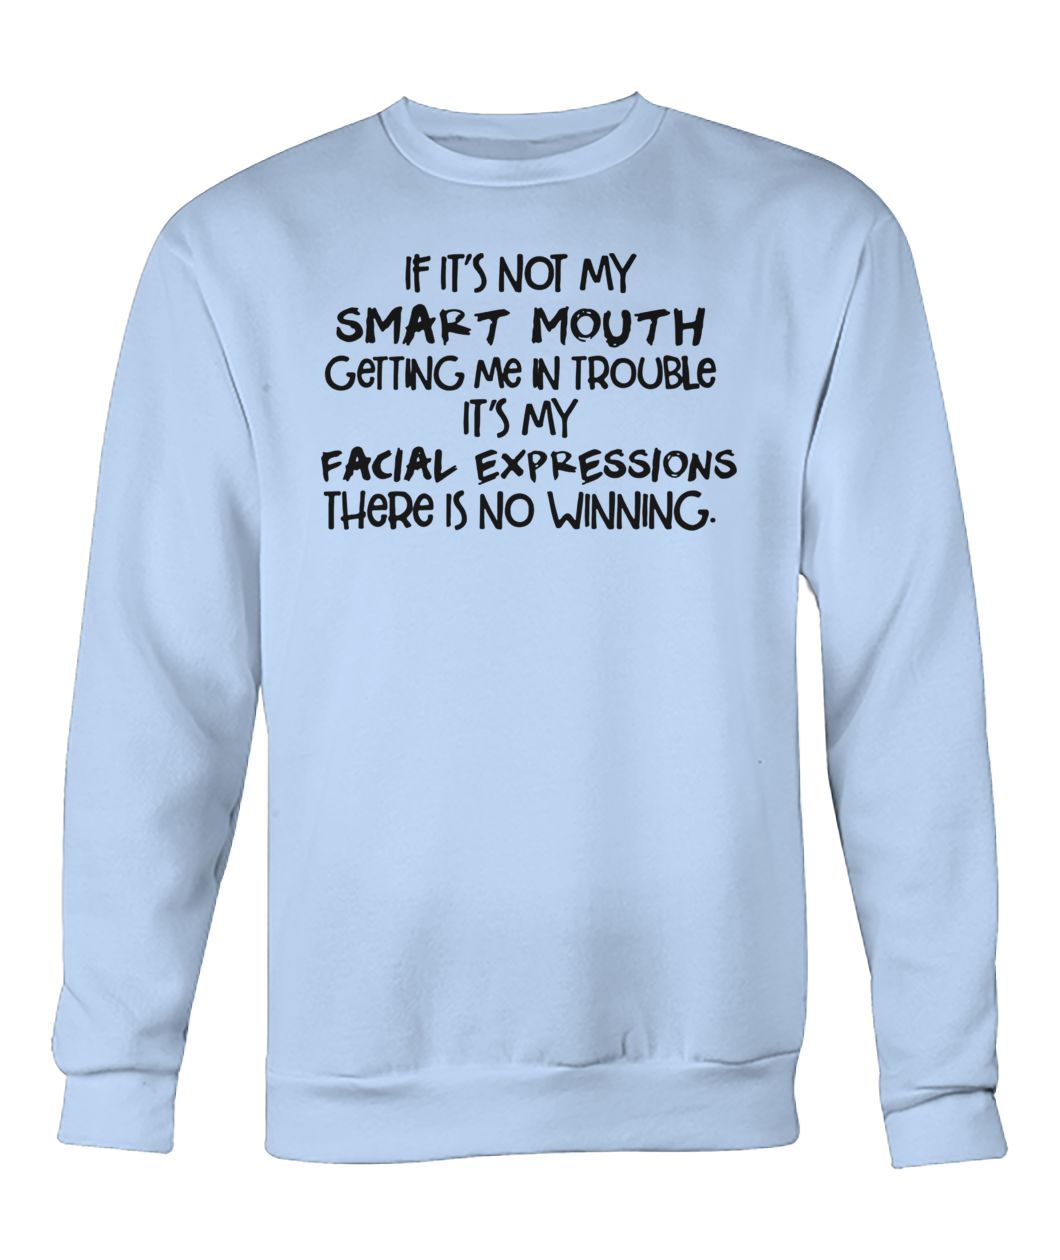 If it's not my smart mouth getting me in trouble it's my facial expressions crew neck sweatshirt